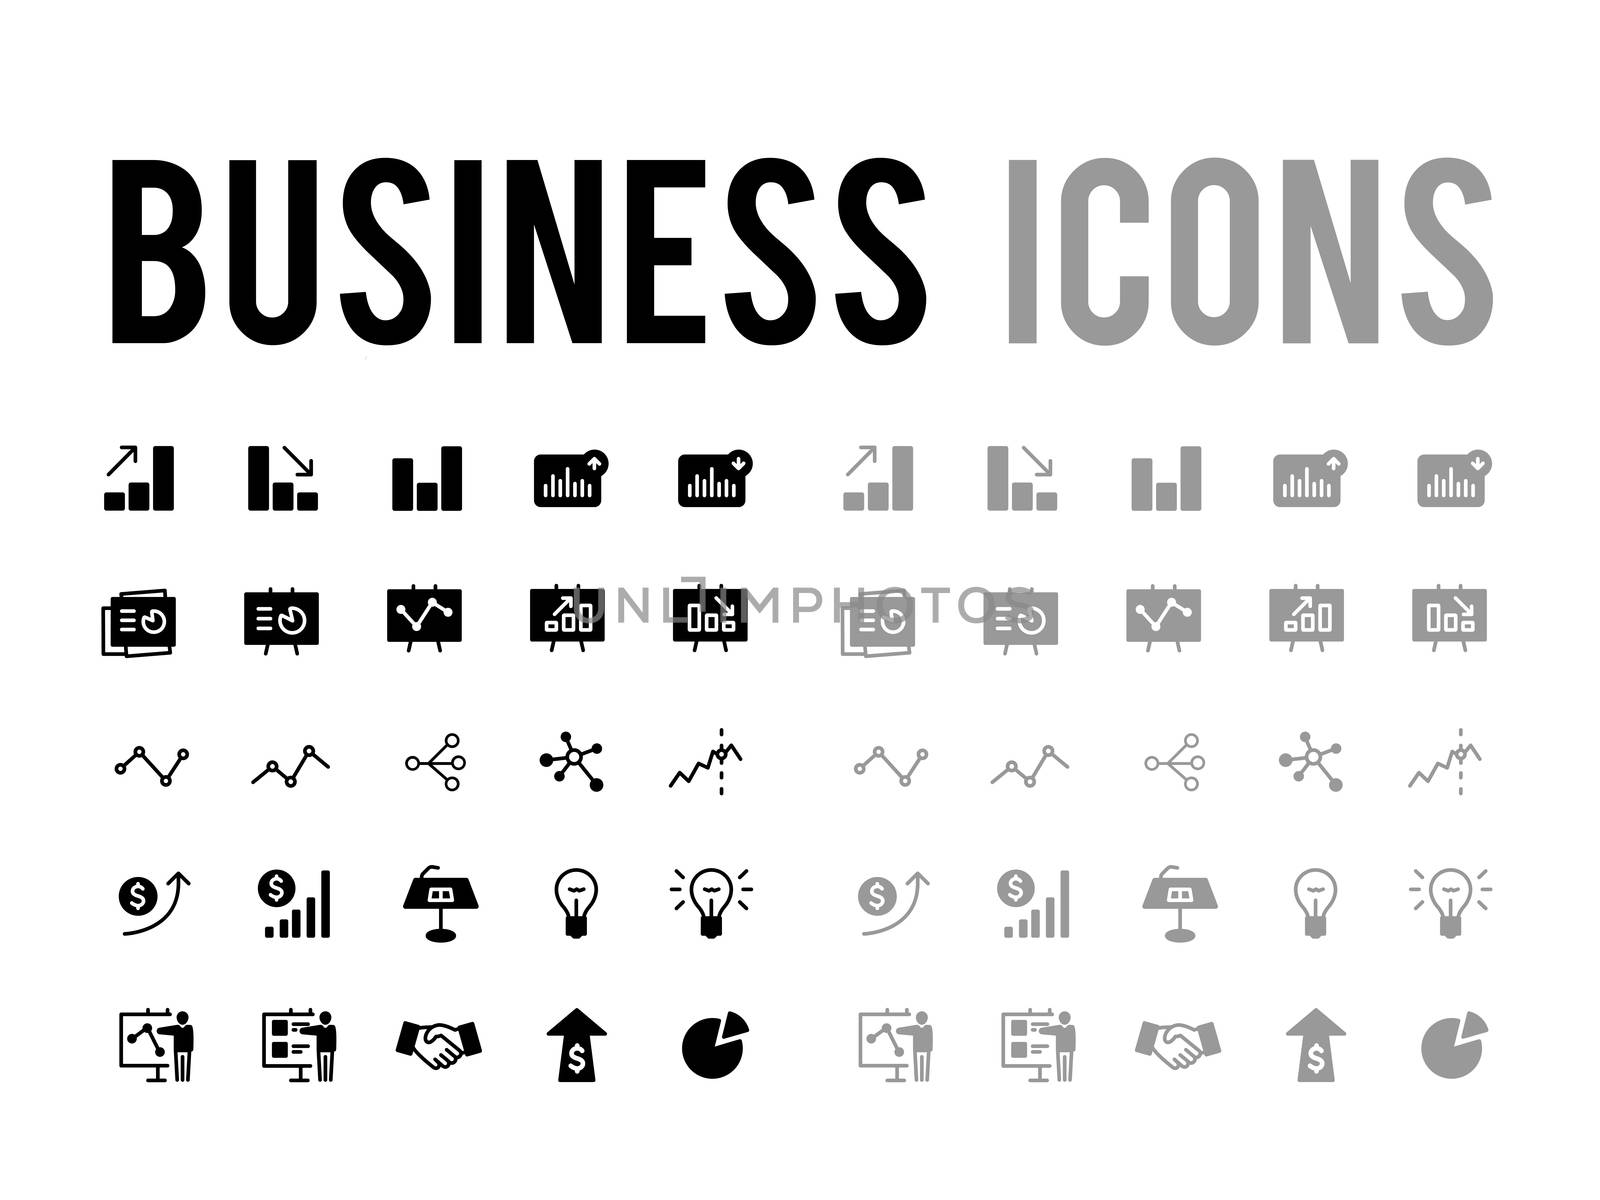 Business devleopment and analyics report vector icon set  by cougarsan